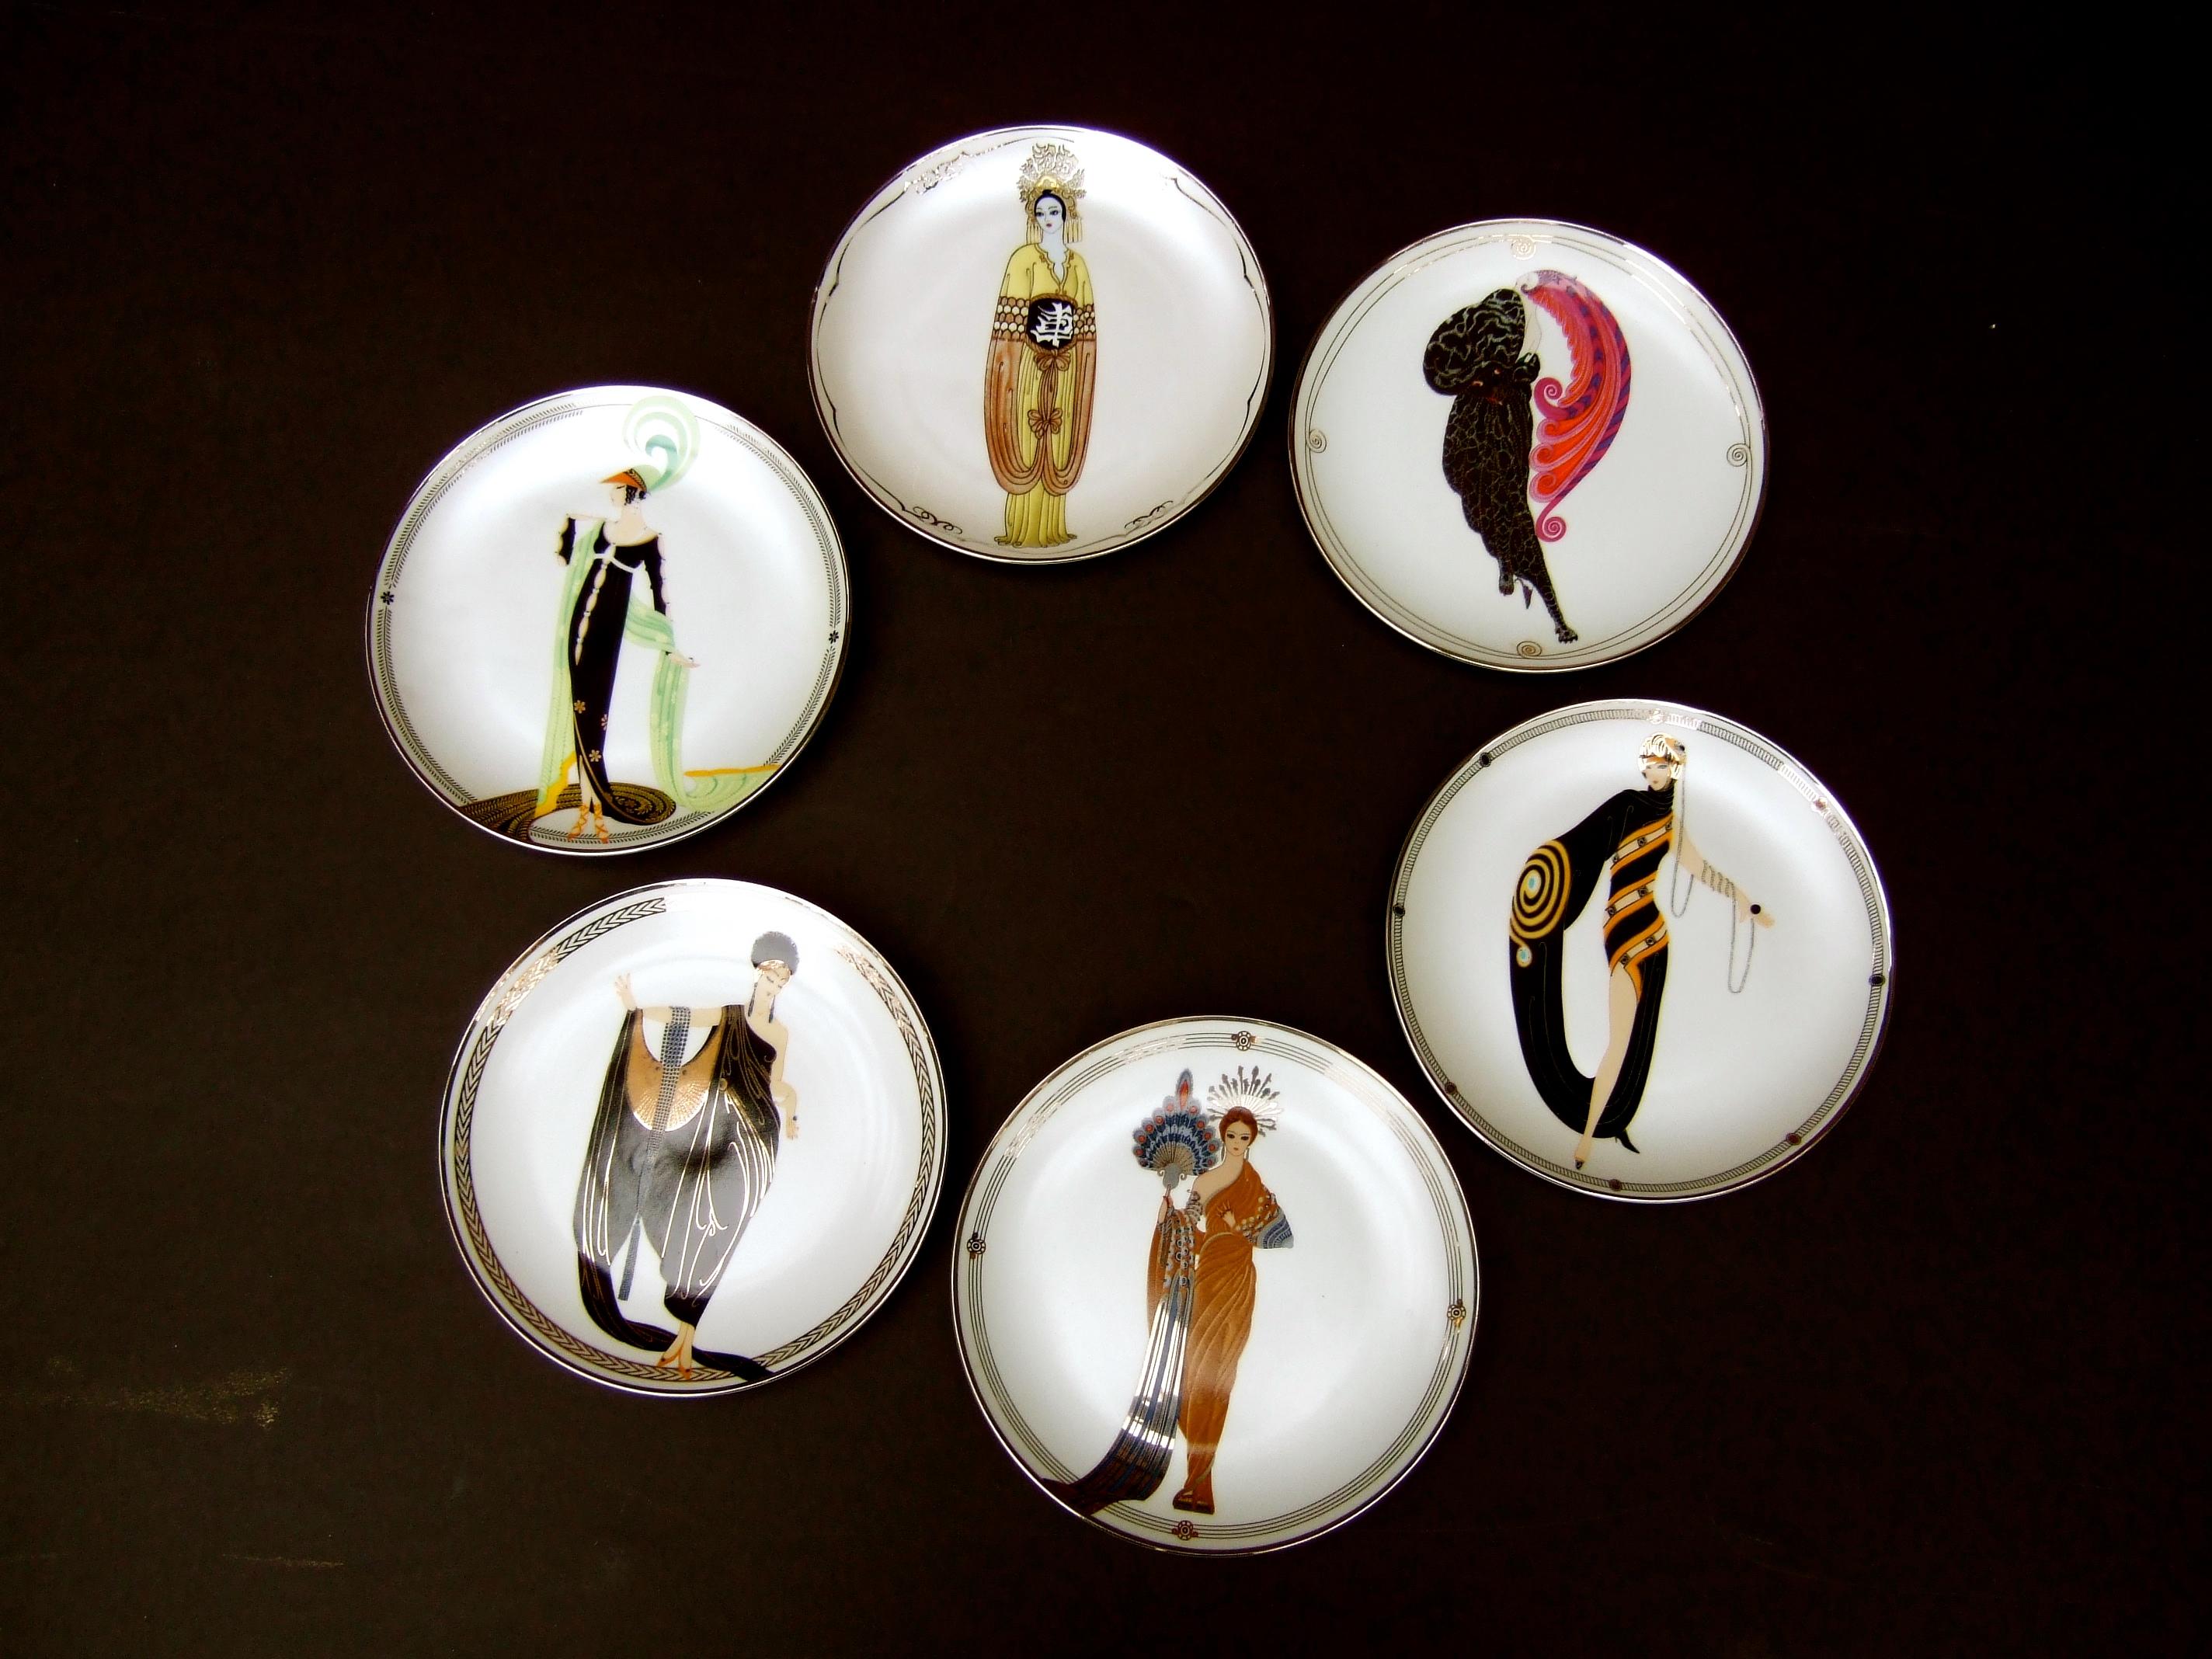 Set of six House of Erte' numbered porcelain ceramic decorative plates c 1980s
The six decorative porcelain plates are designed with an elegant stylized
art deco woman from the Erte' archives

The designs have been issued by the House of Erte' for